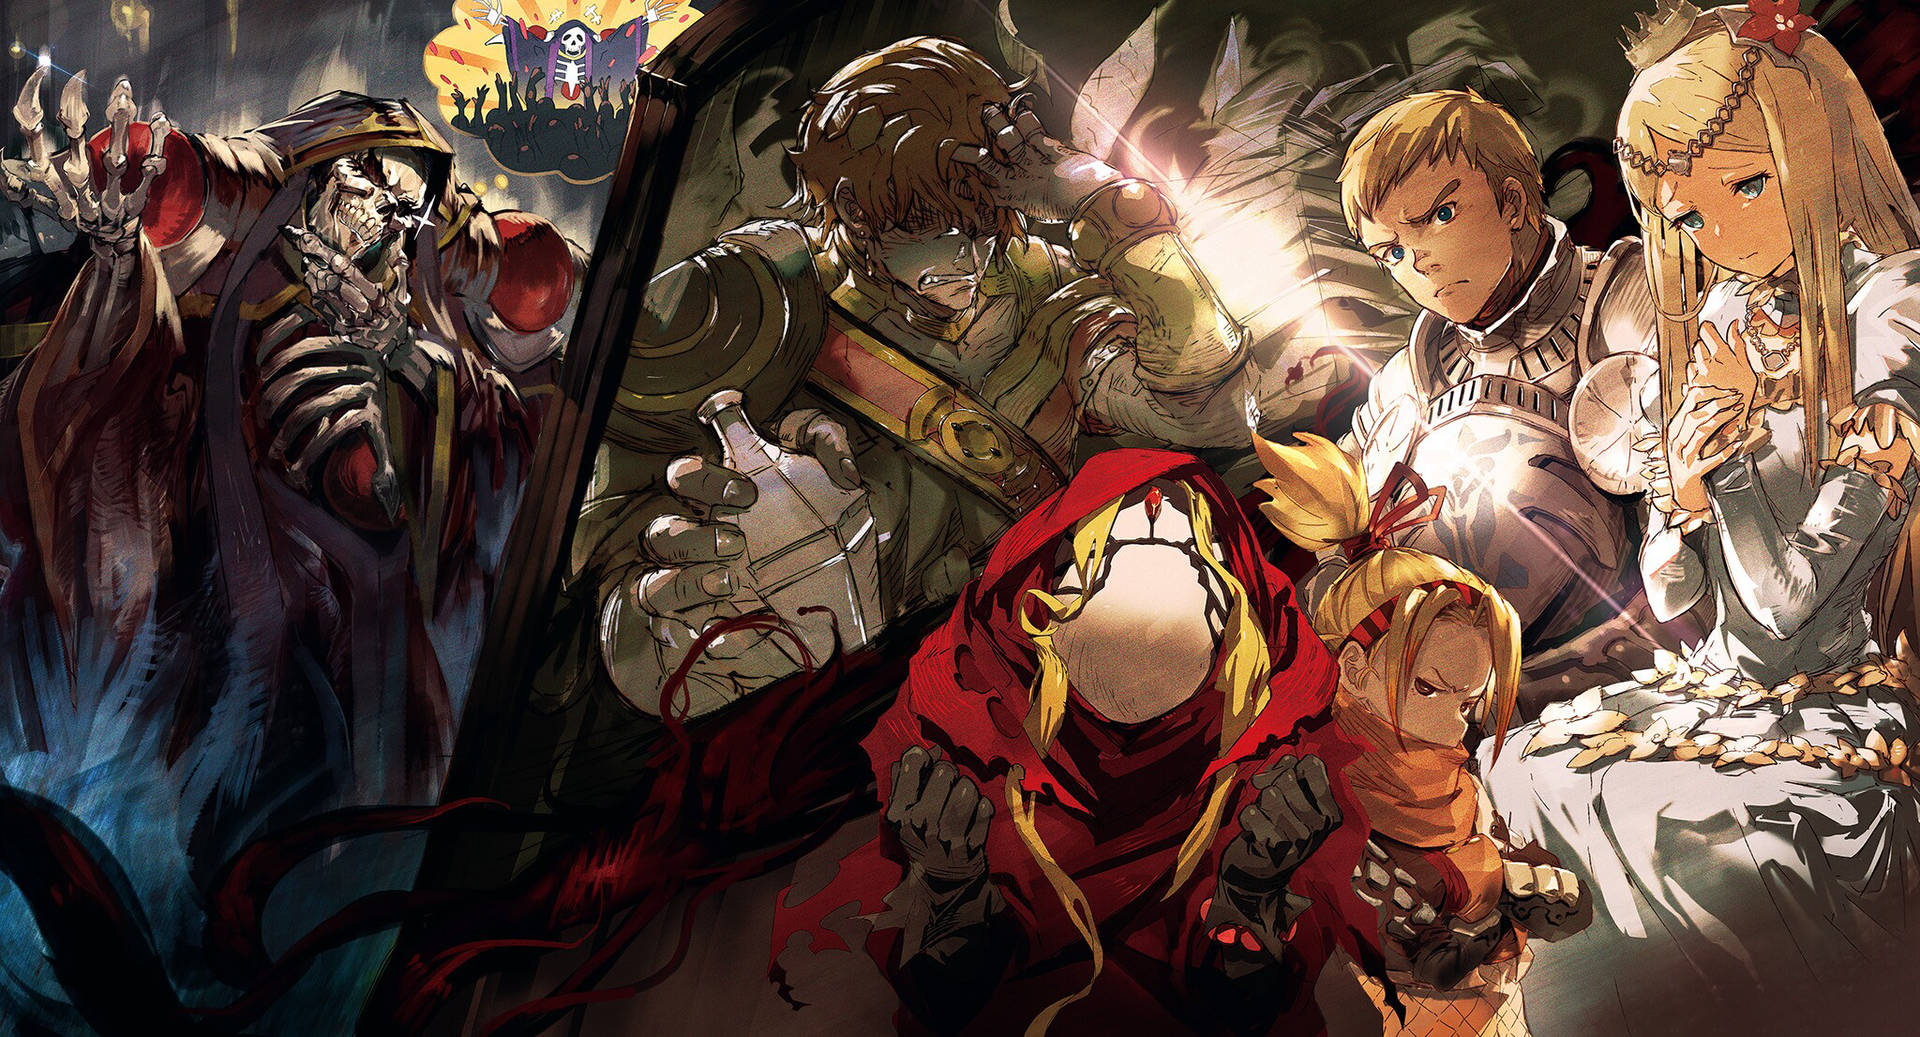 Free Overlord Wallpaper Downloads, [100+] Overlord Wallpapers for FREE |  